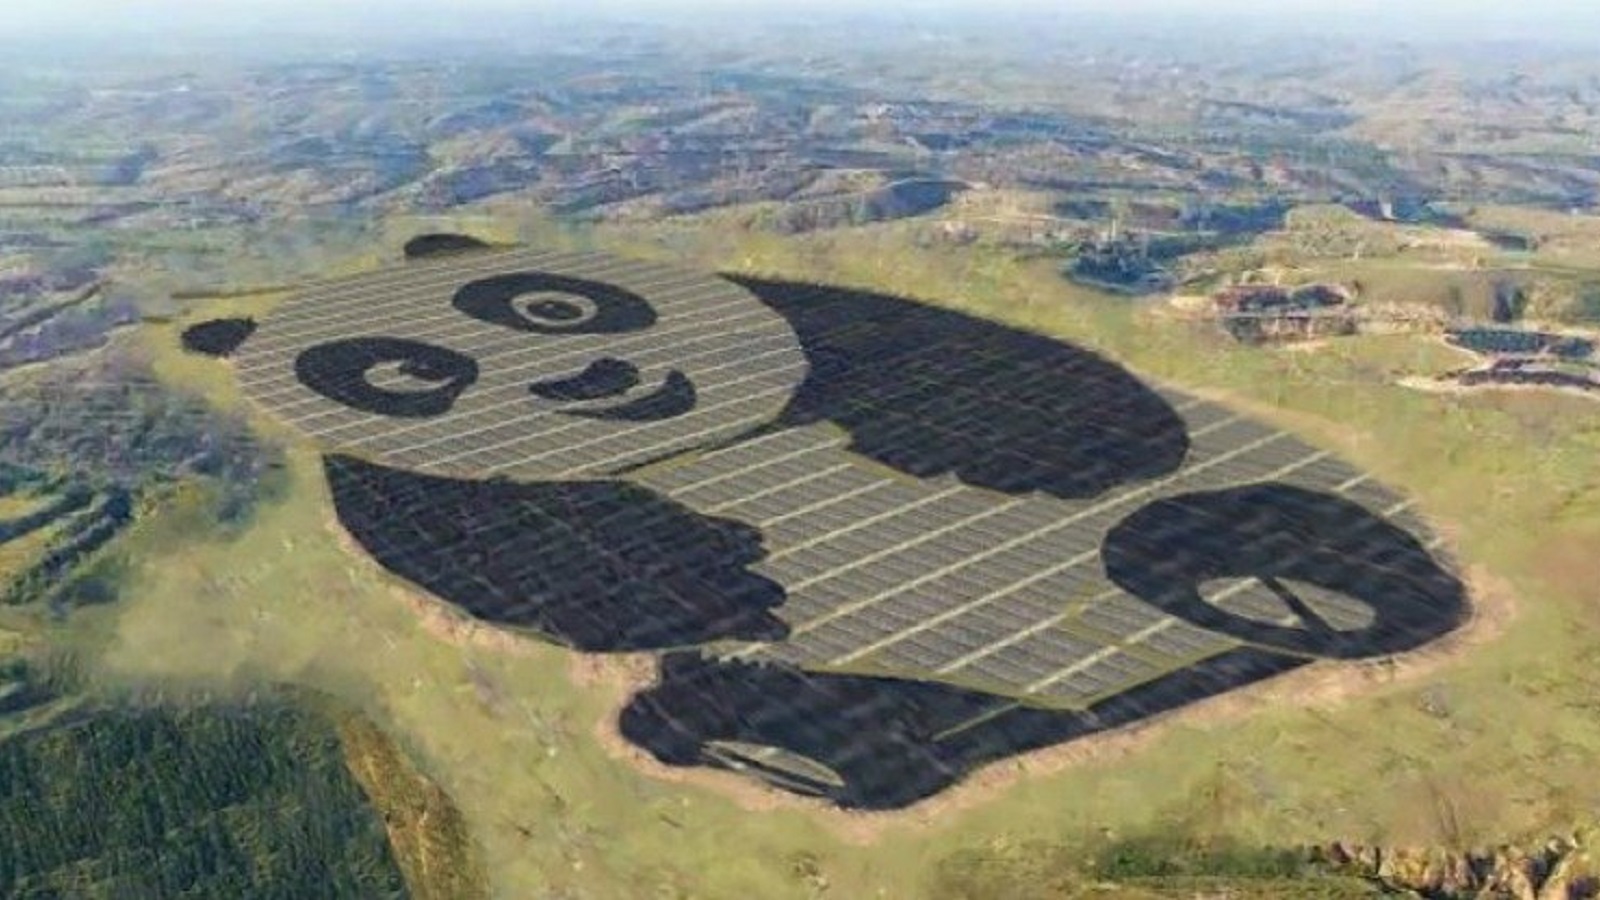 World’s First Panda Power Plant Teaches Youth About Clean Energy